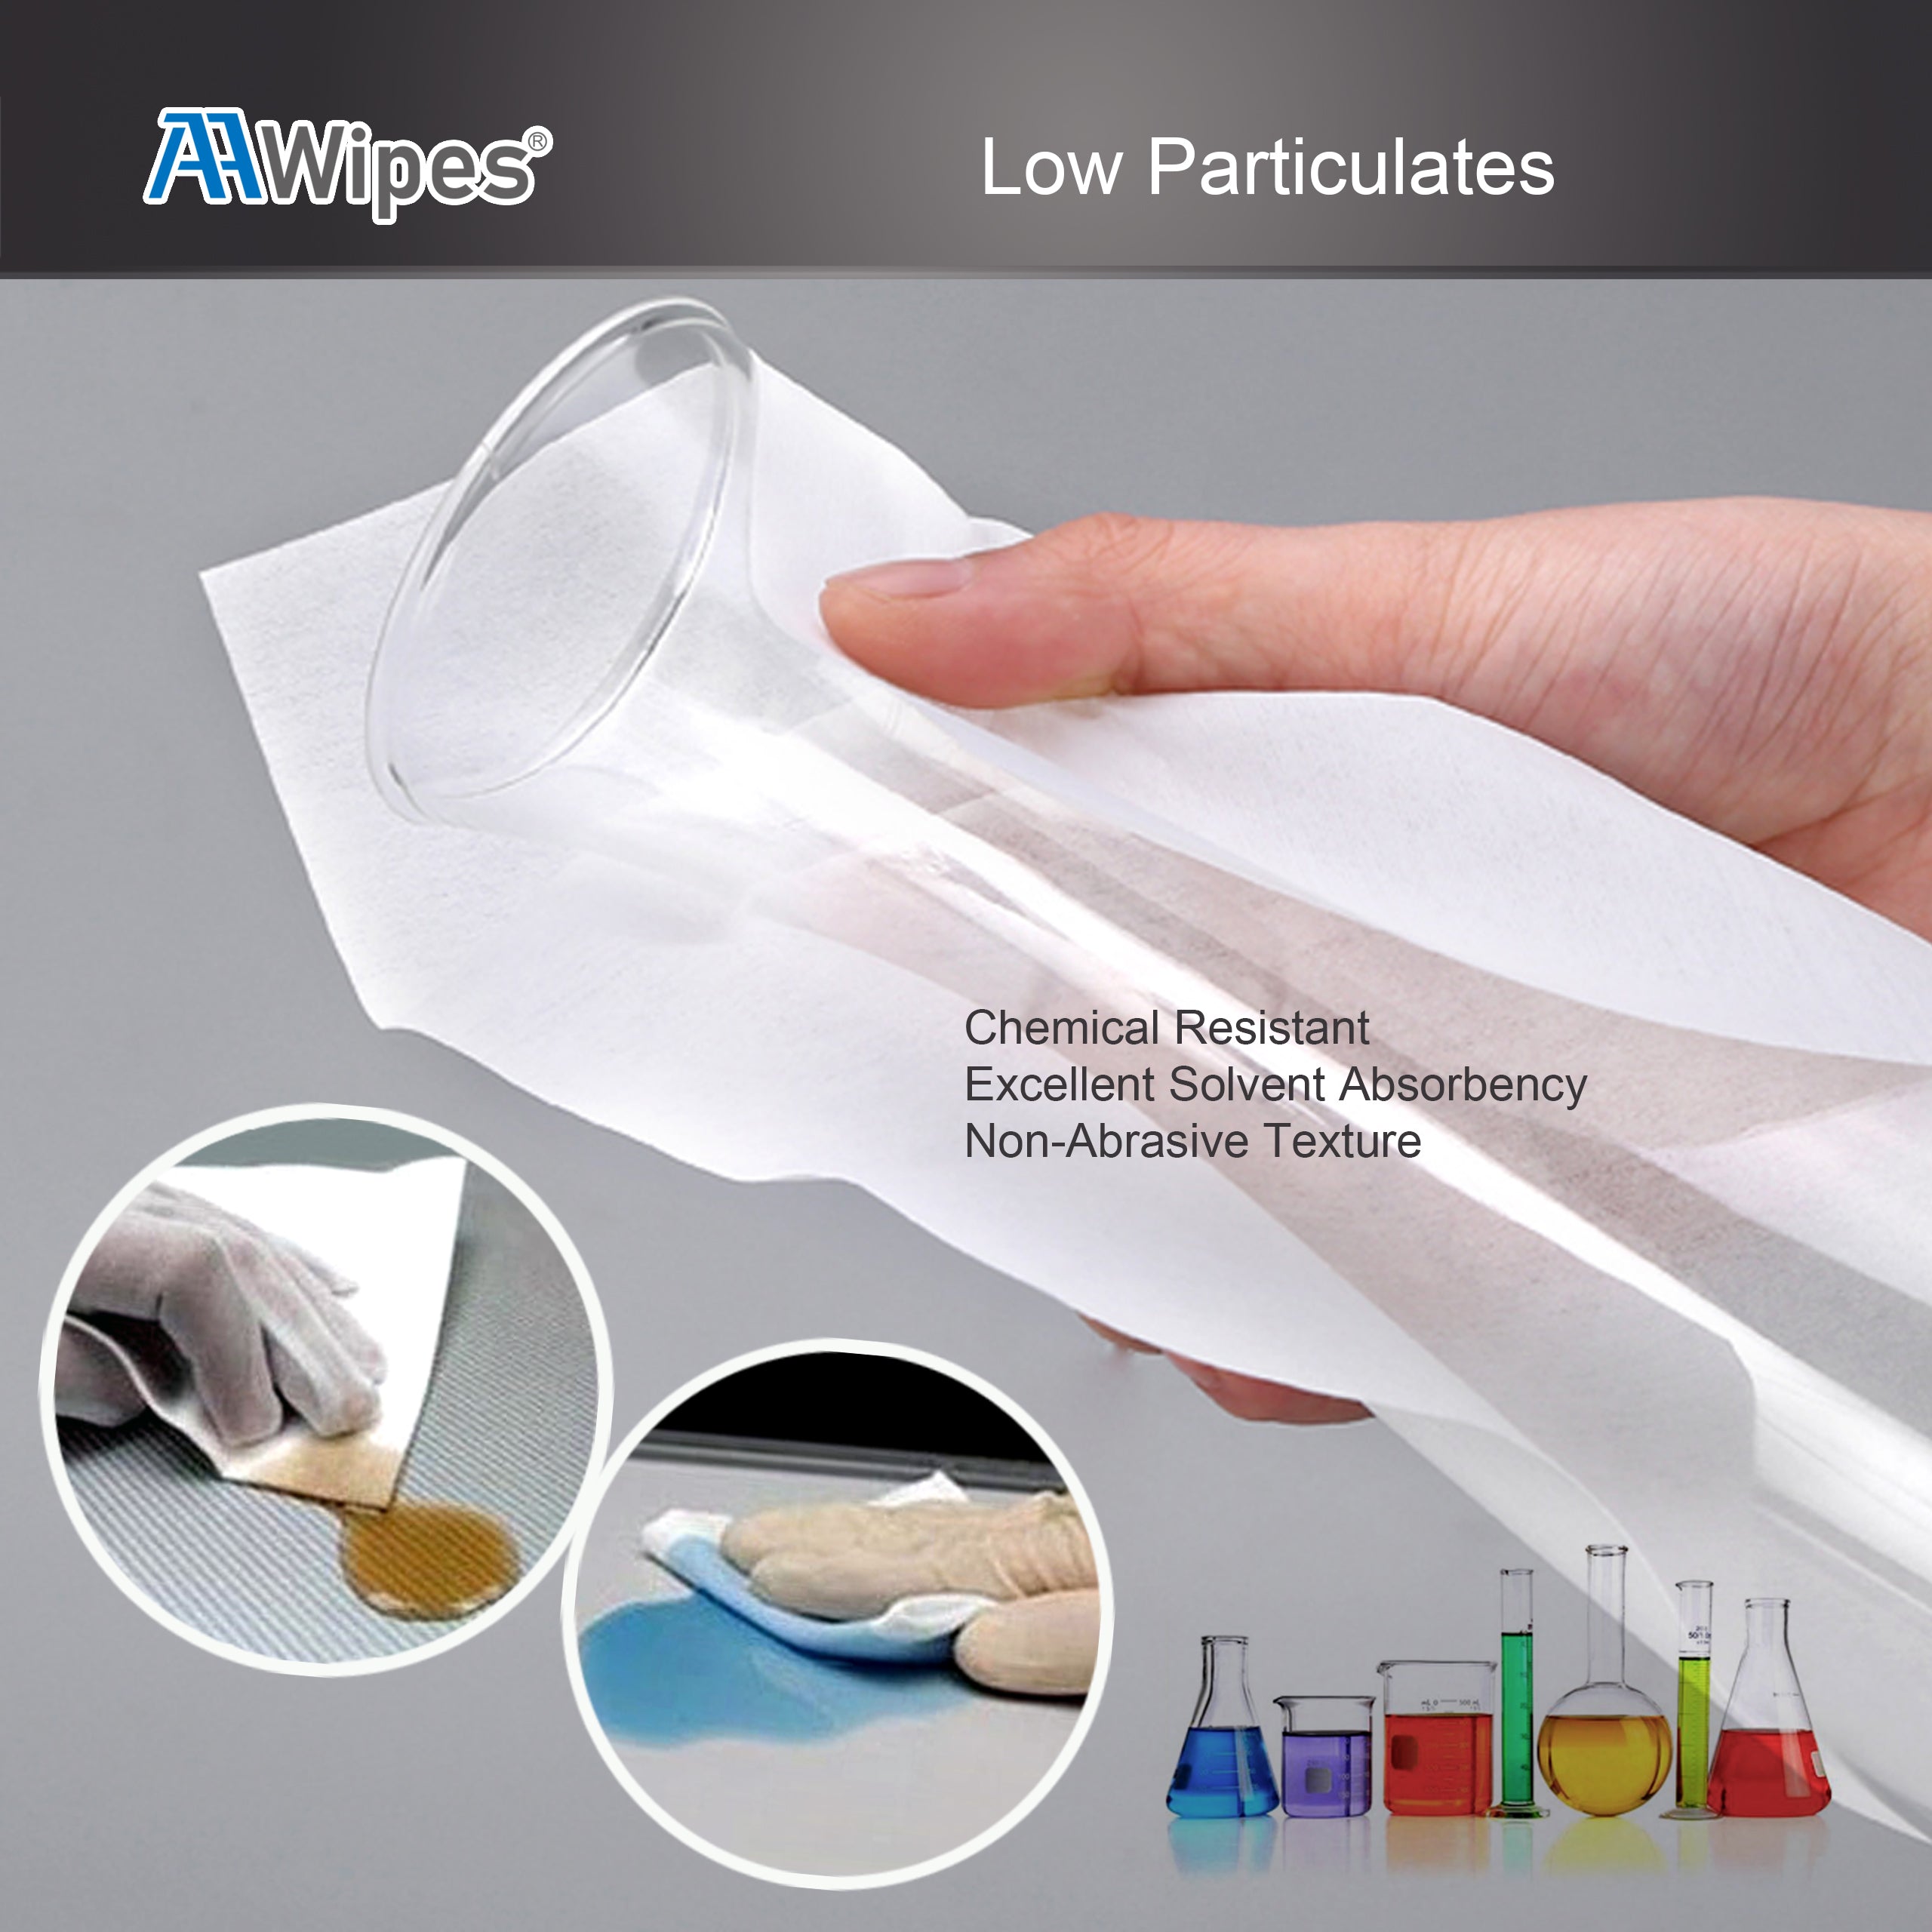 Cleanroom Wipers Nonwoven 9"x9" Cellulose/Polyester Blend Disposable Wipes for Lab, Food Service, Automotive, Printing and Semiconductor Industries. Starts with 4,200 wipes/box in 14 bags (No. NW06809).